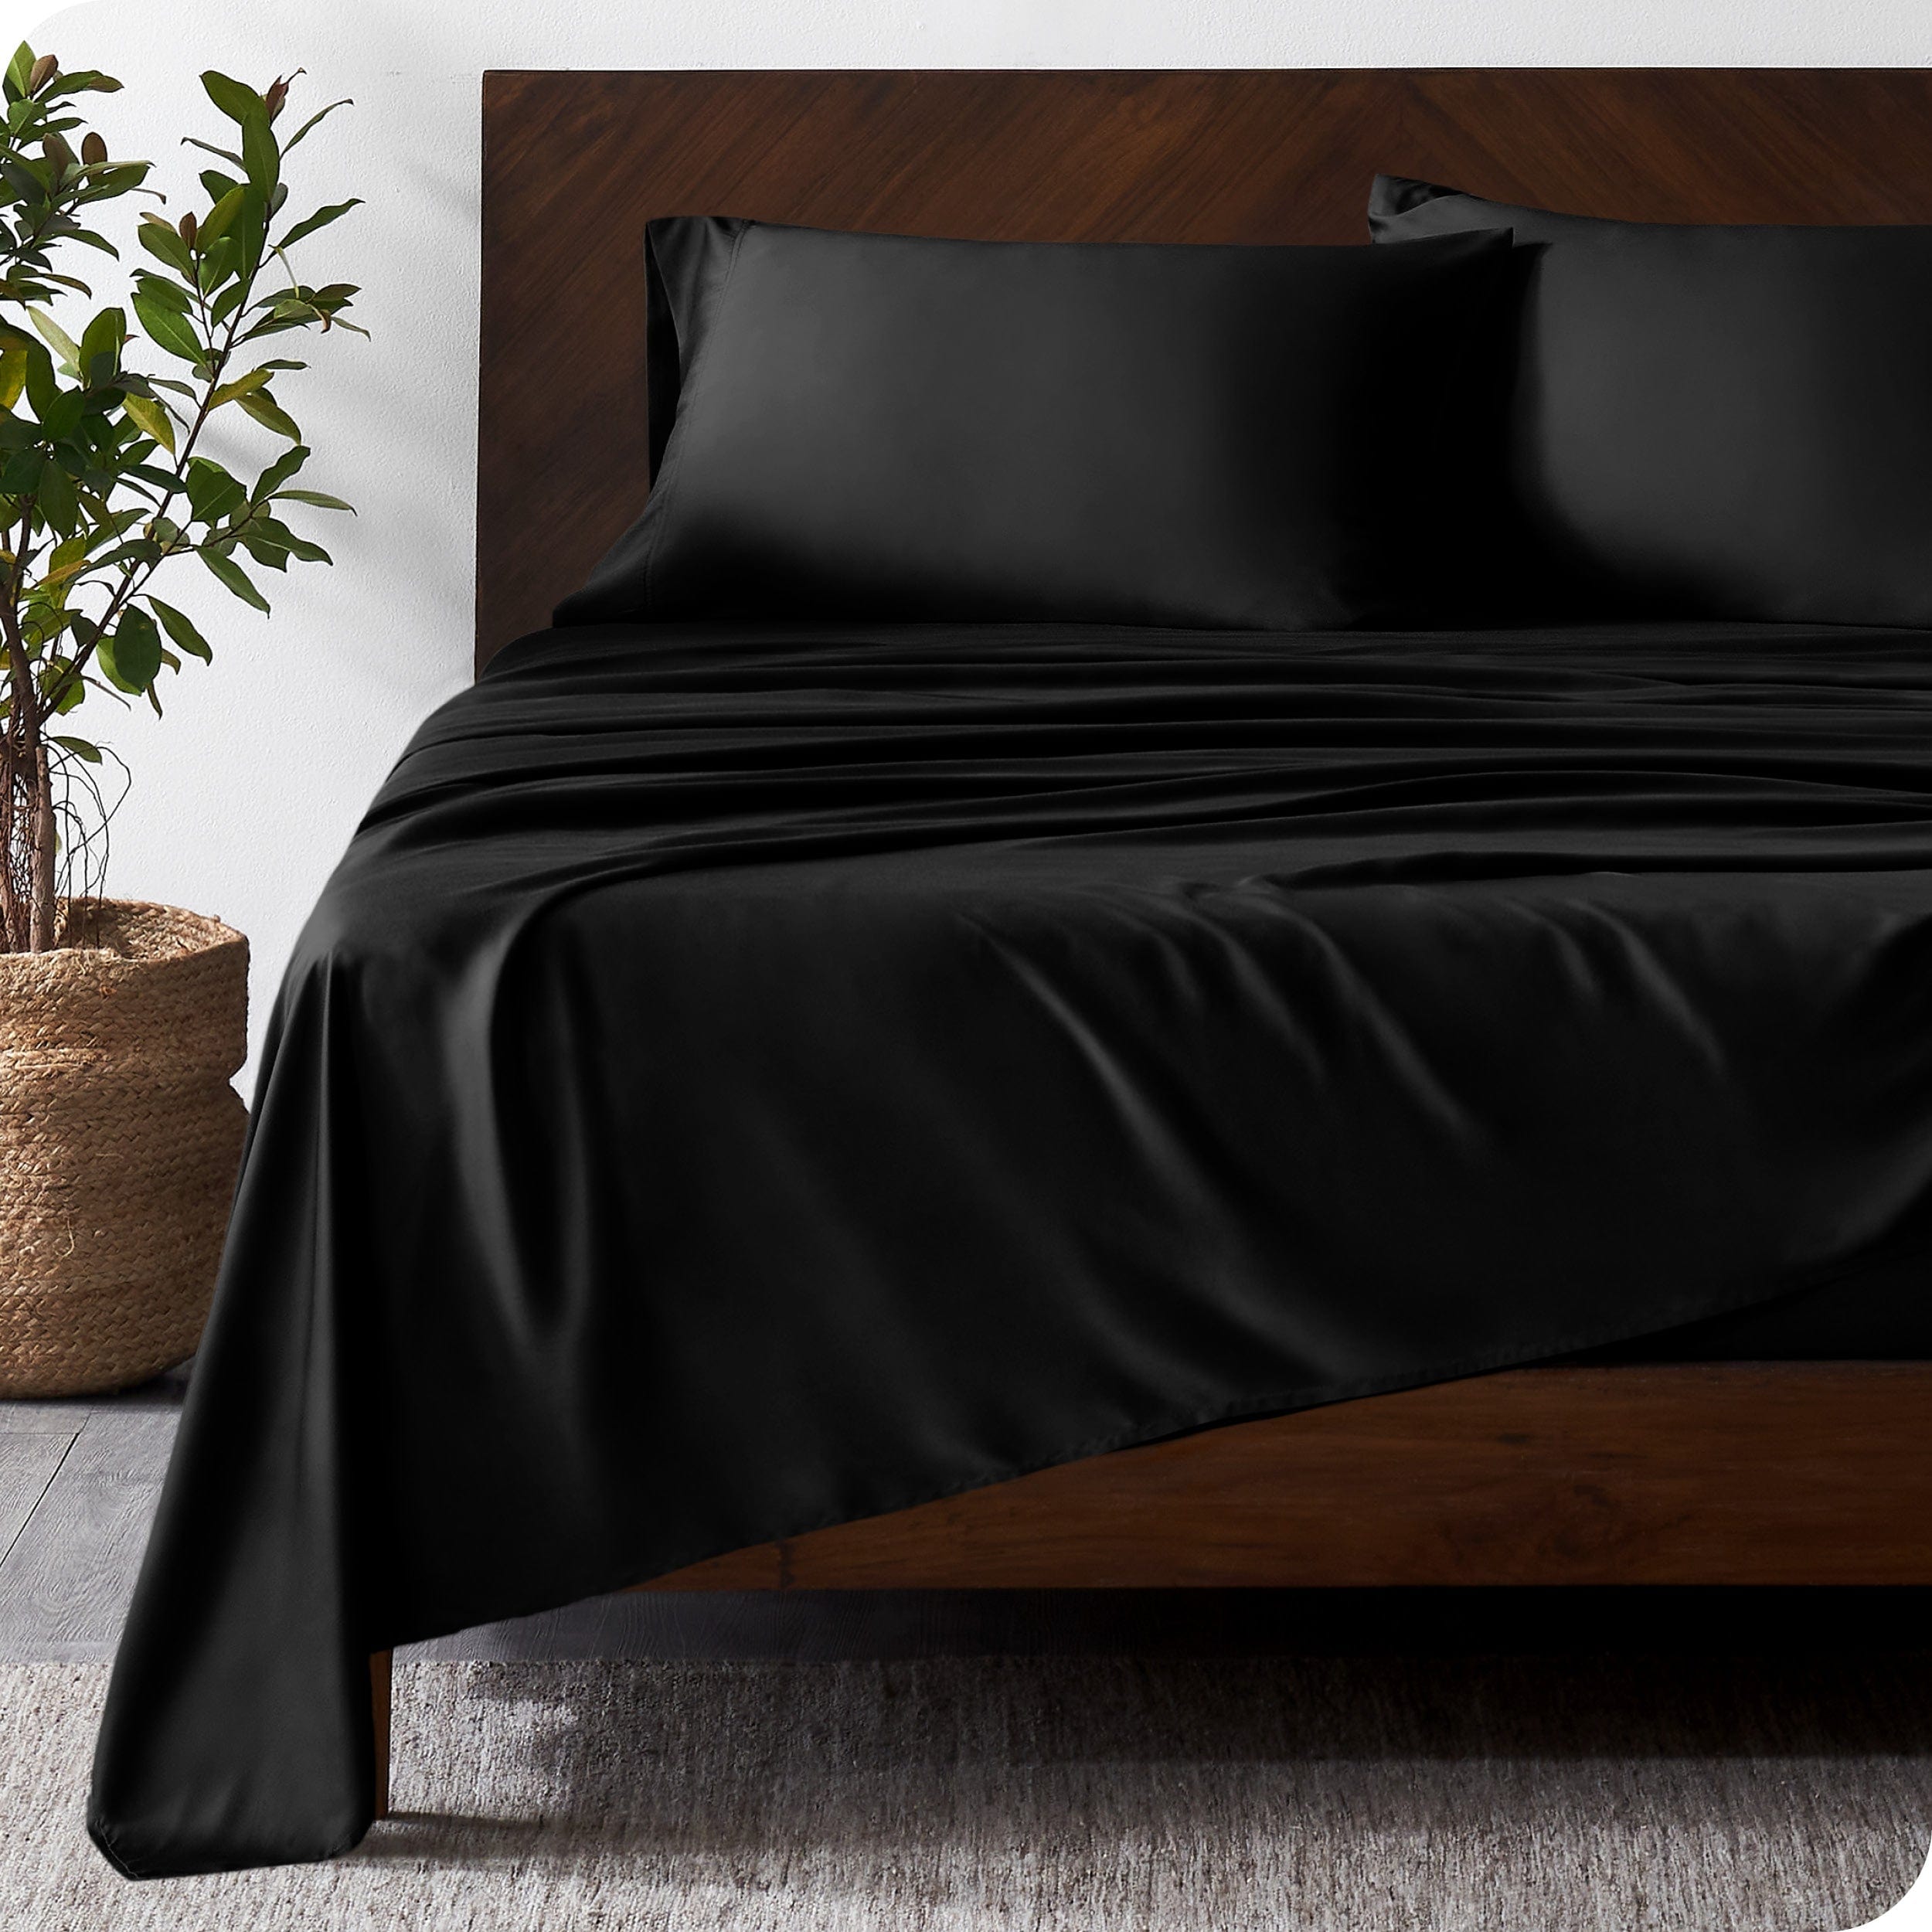 Wooded bed frame with bamboo sheets on the bed